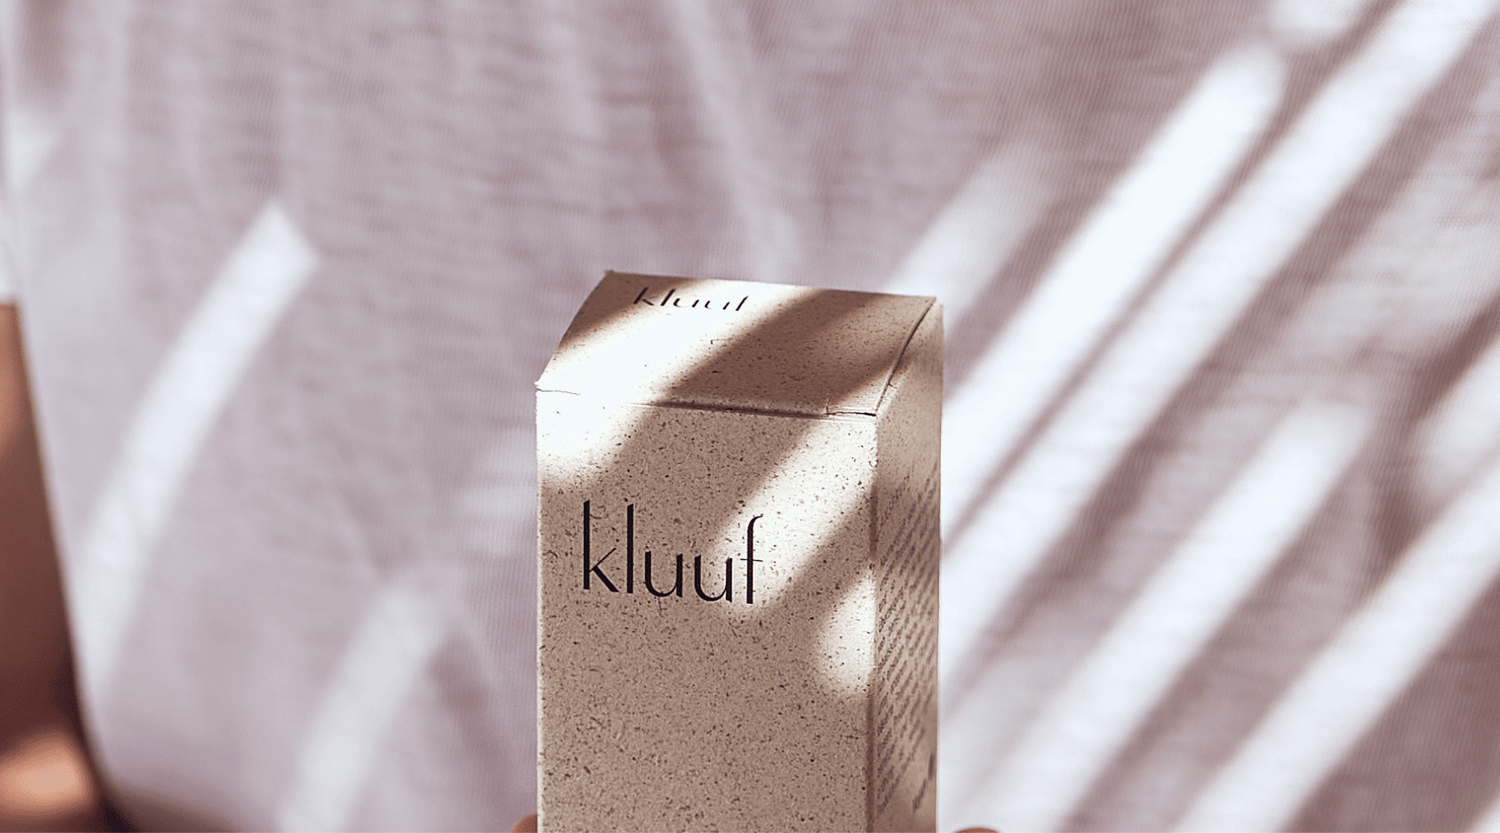 Close-up Kluuf face cream packaging in front of white t-shirt